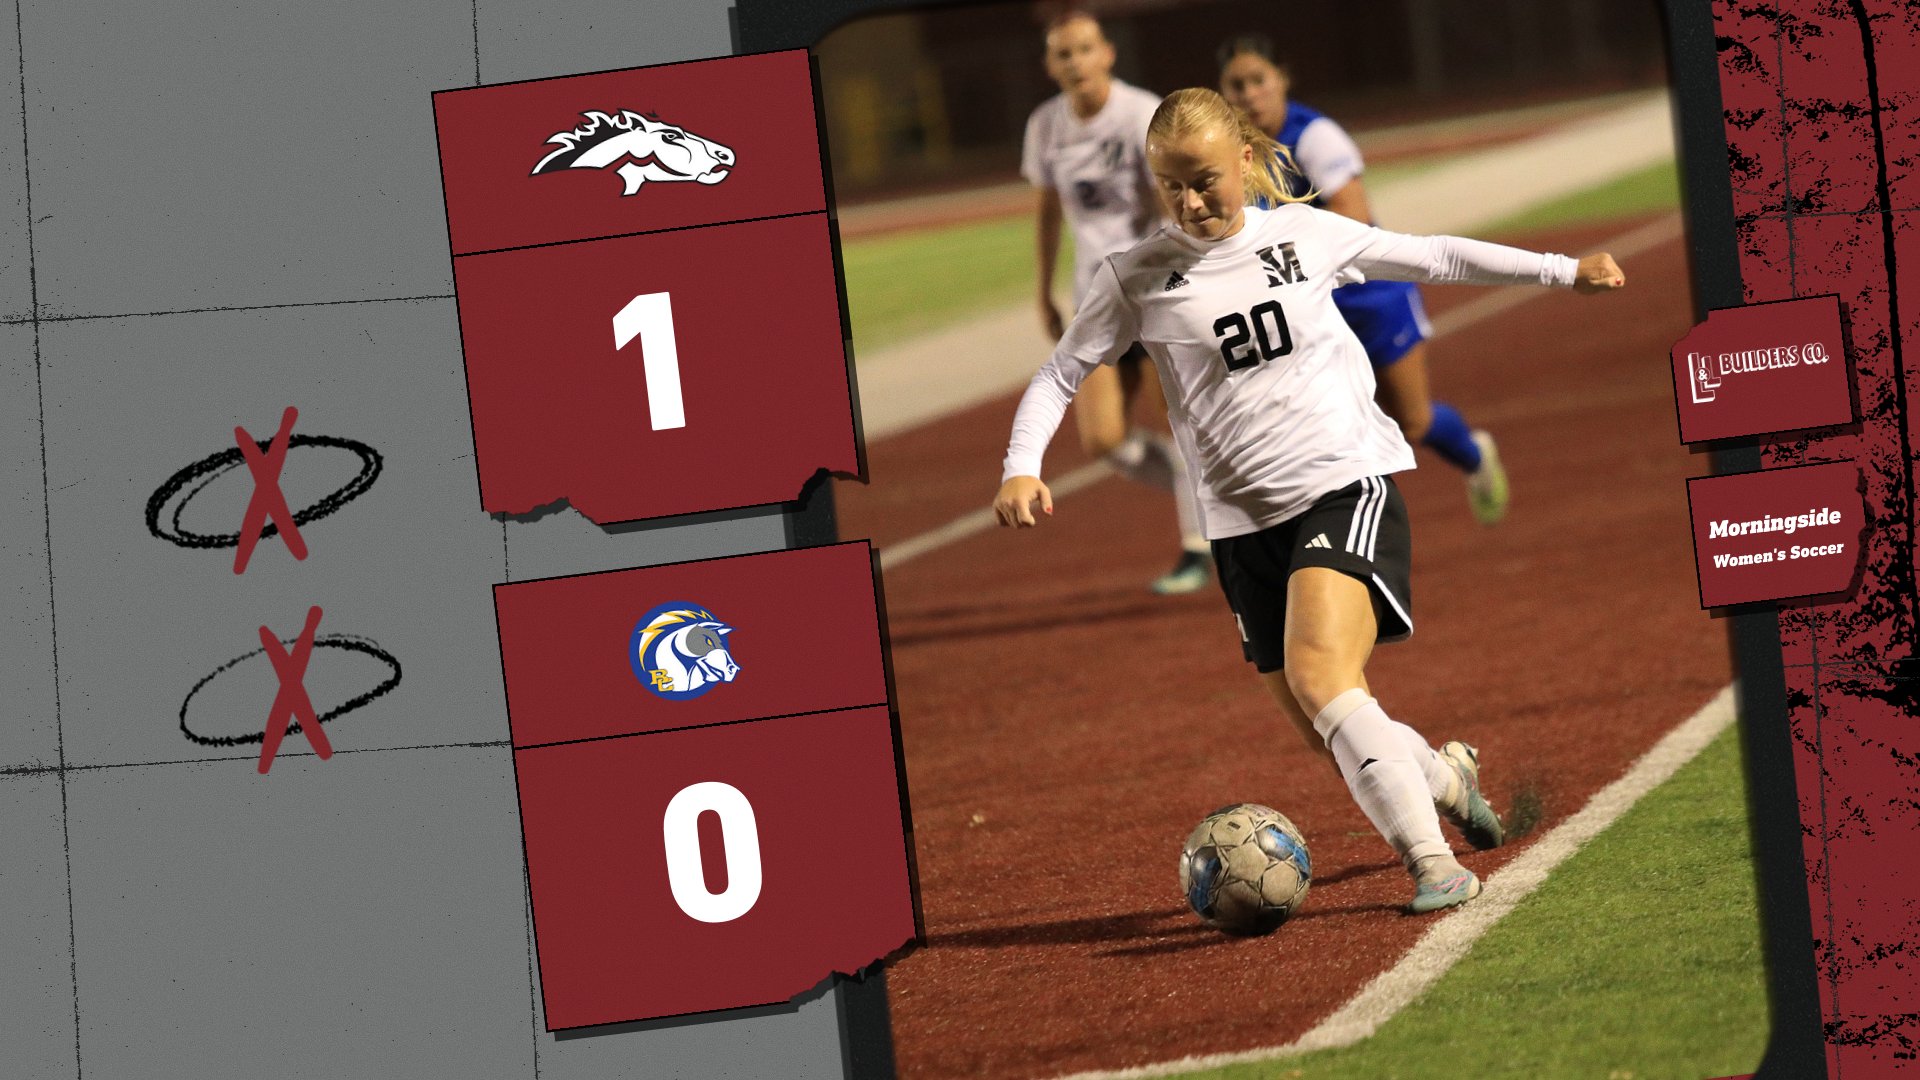 Second-half goal lifts Morningside past Chargers